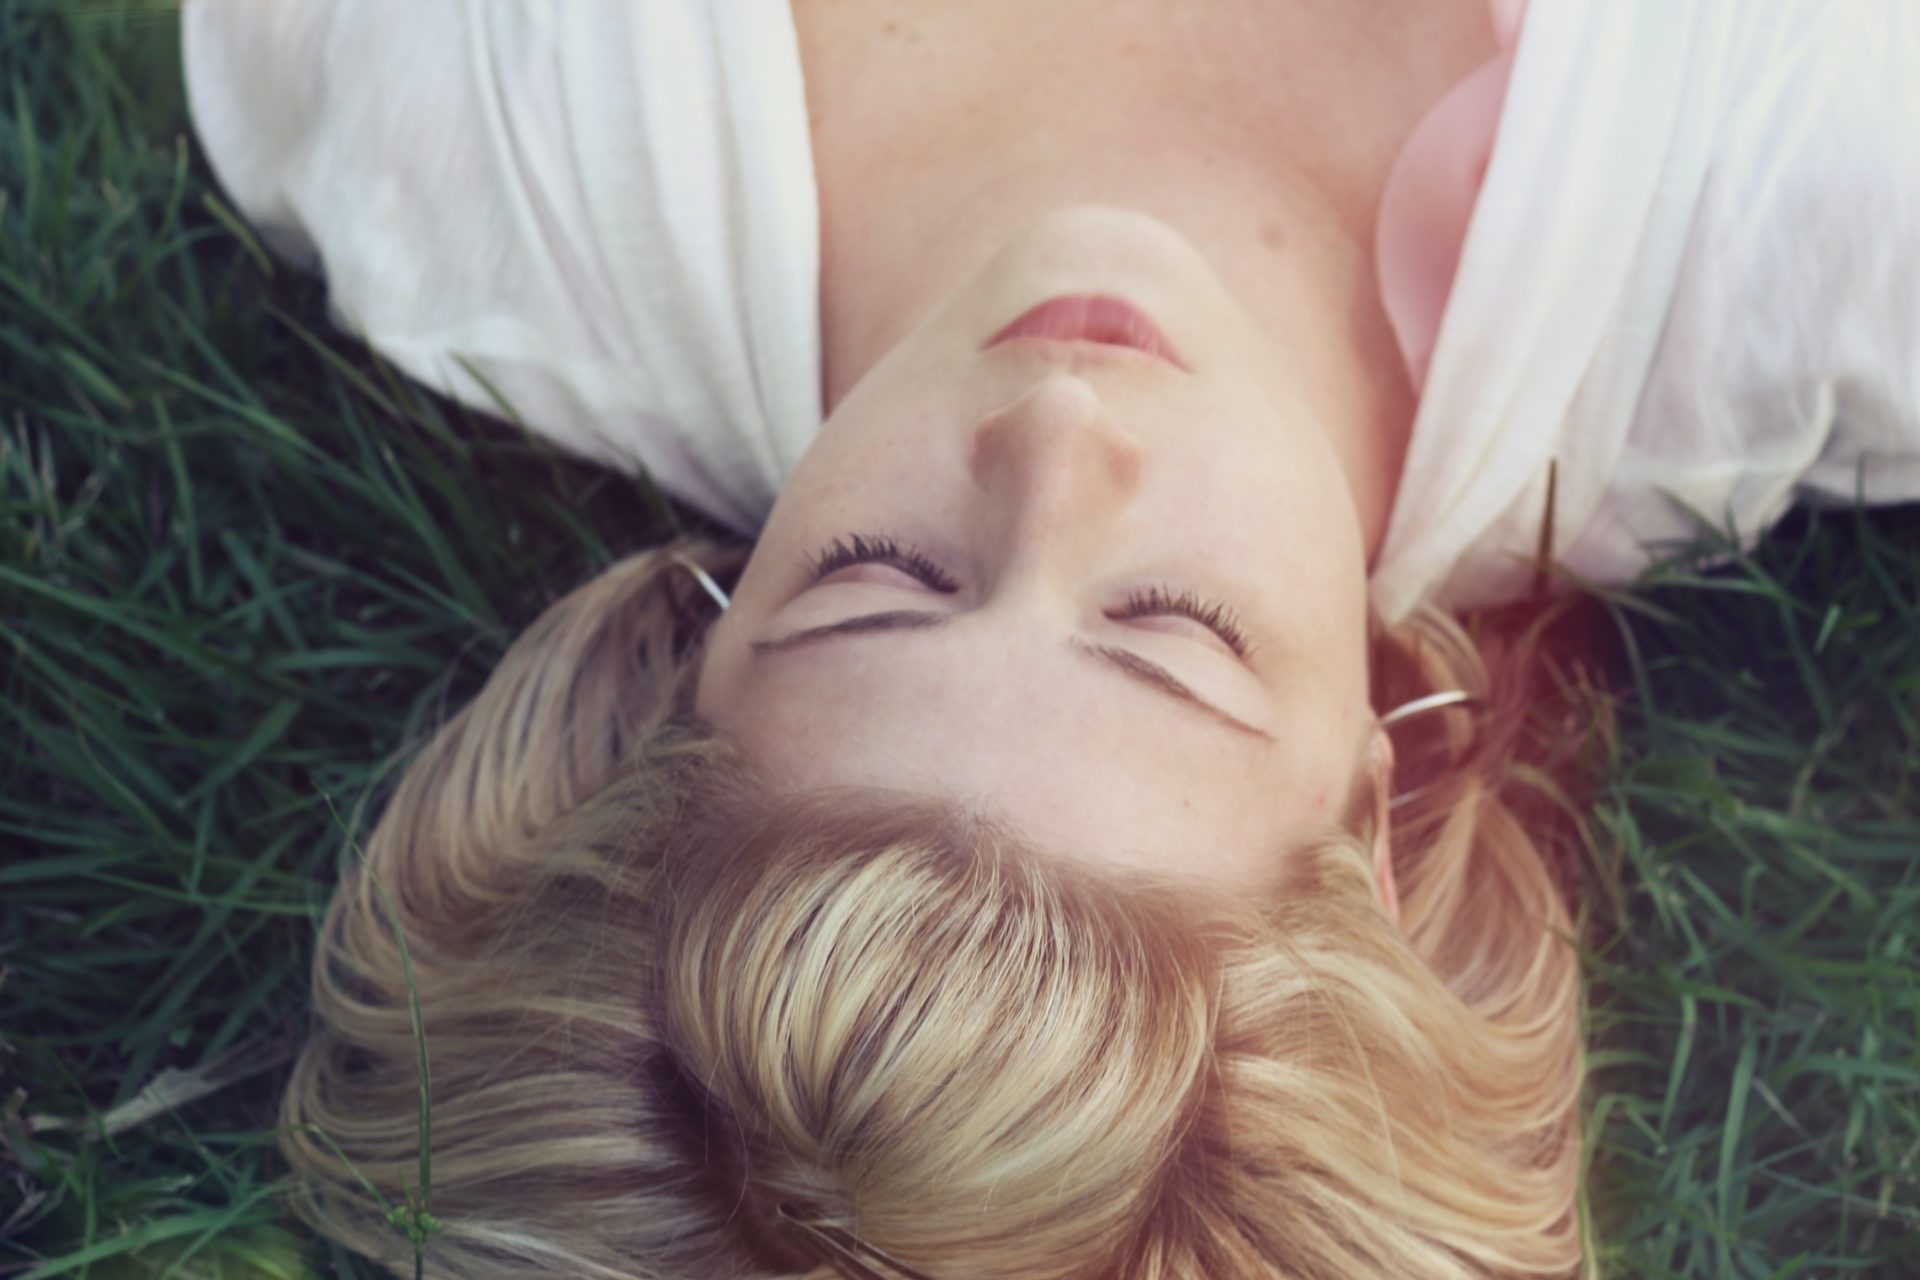 Head-shot of a woman, lying down on grass at rest